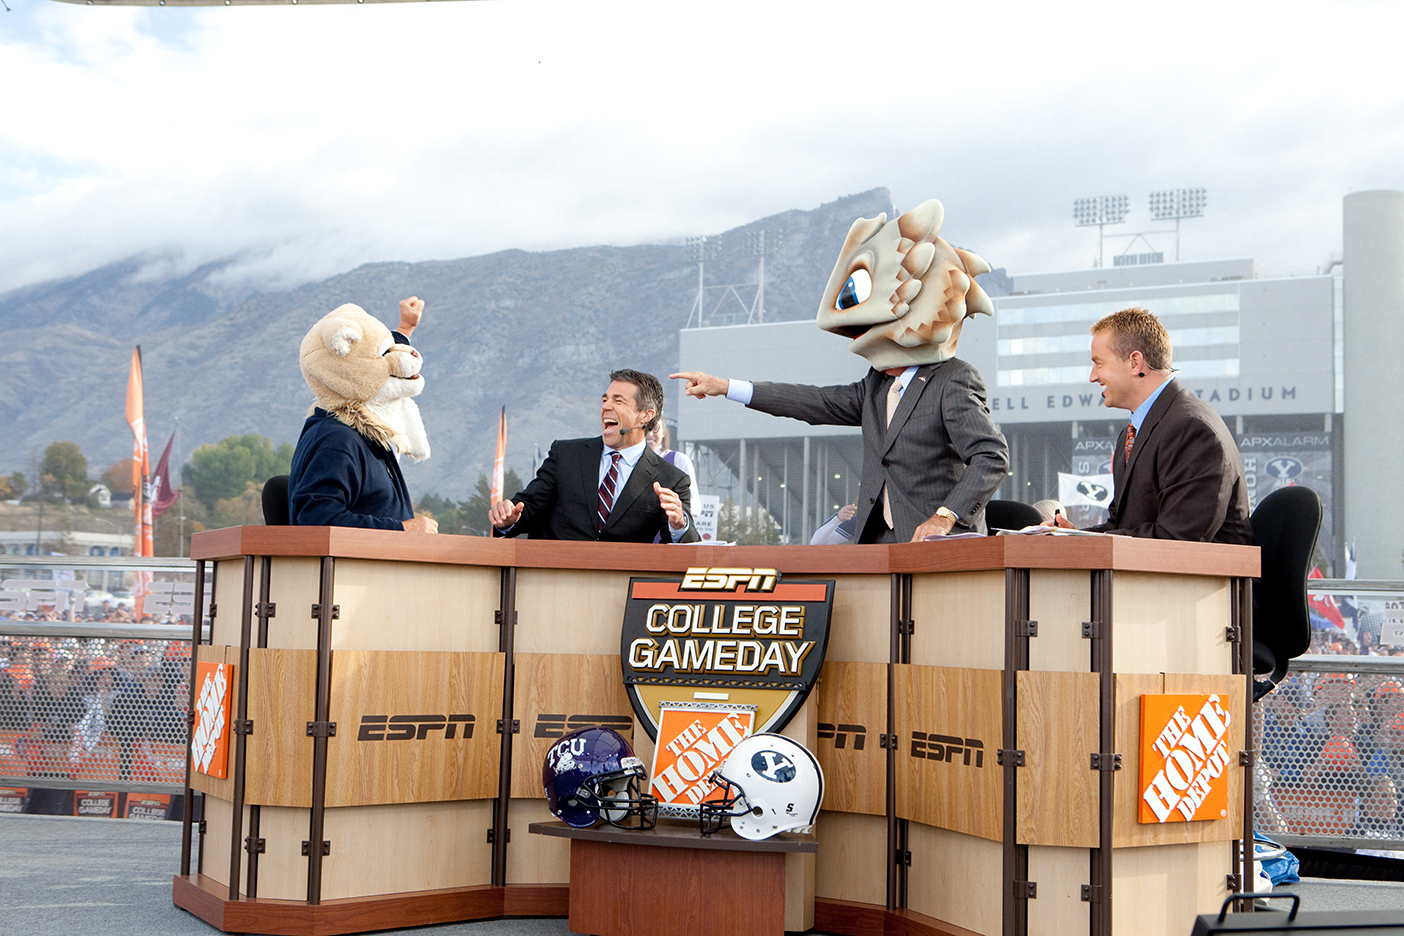 LaVell Edwards wear Cosmo's head on a live broadcast of ESPN College Gameday with Lee Corso who is wearing the TCU SuperFrog head.